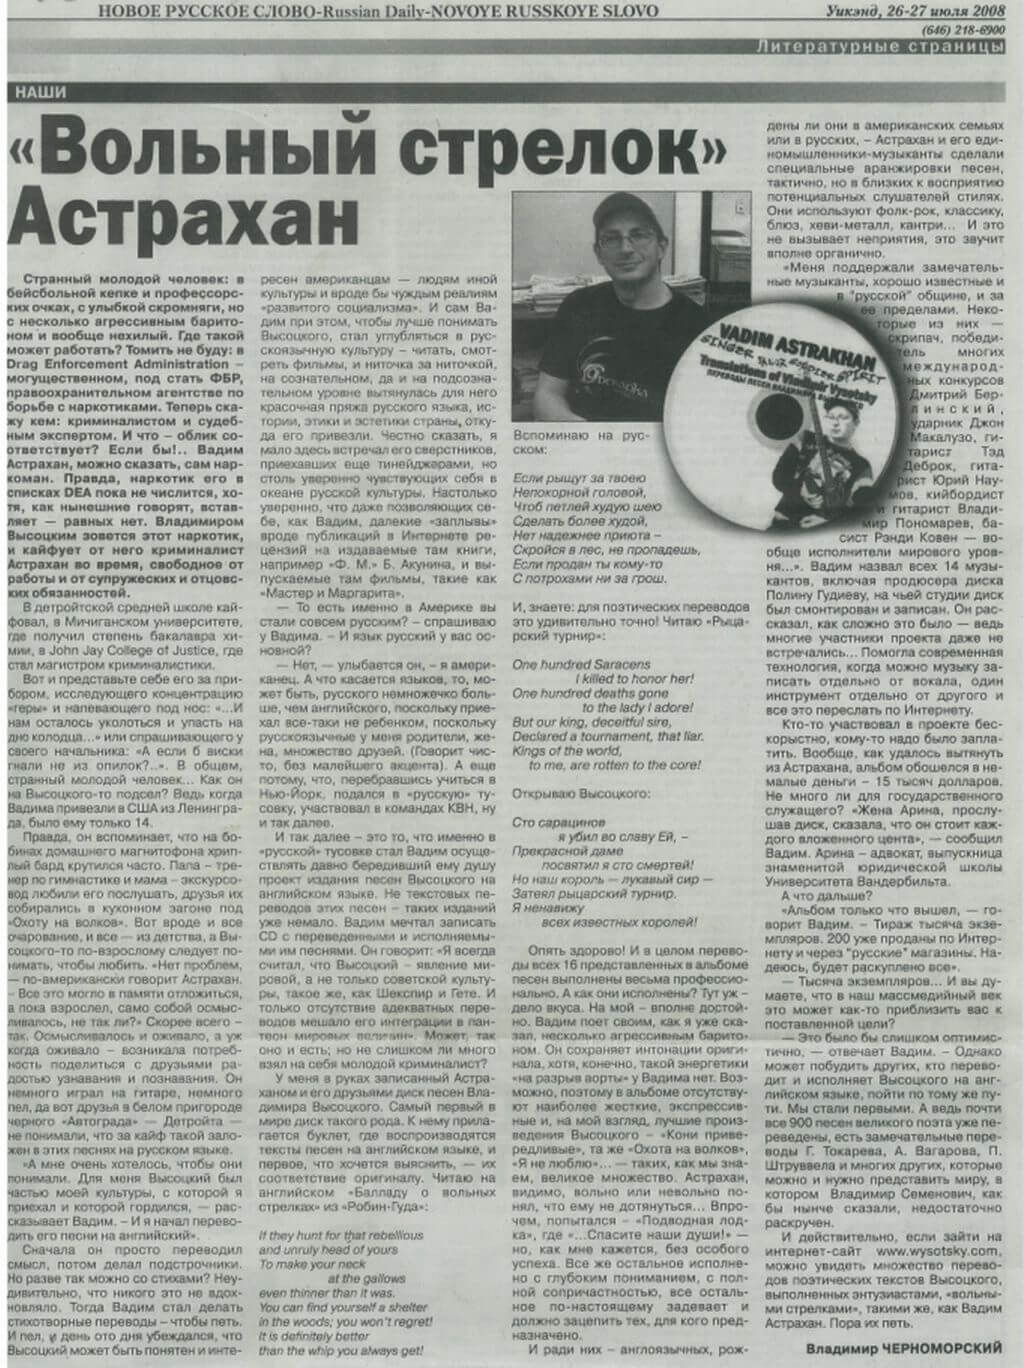 Interview by “Novoe Russkoe Slovo” (Russian)